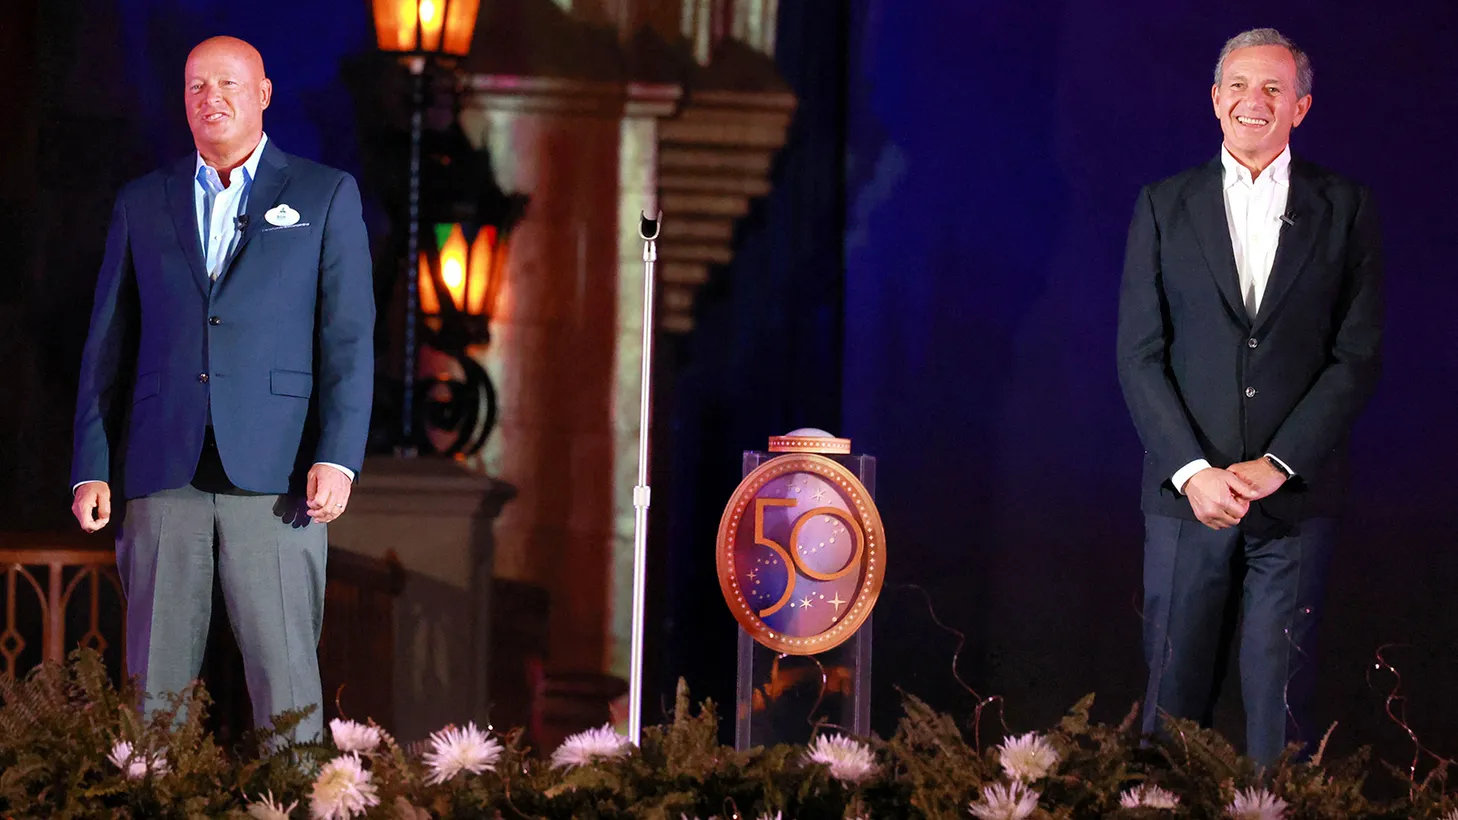 Disney’s CEO Bob Chapek (left), and Bob Iger, executive chairman, deliver remarks during the rededication ceremony marking the 50th anniversary of Walt Disney World, in Florida, on September 30, 2021.